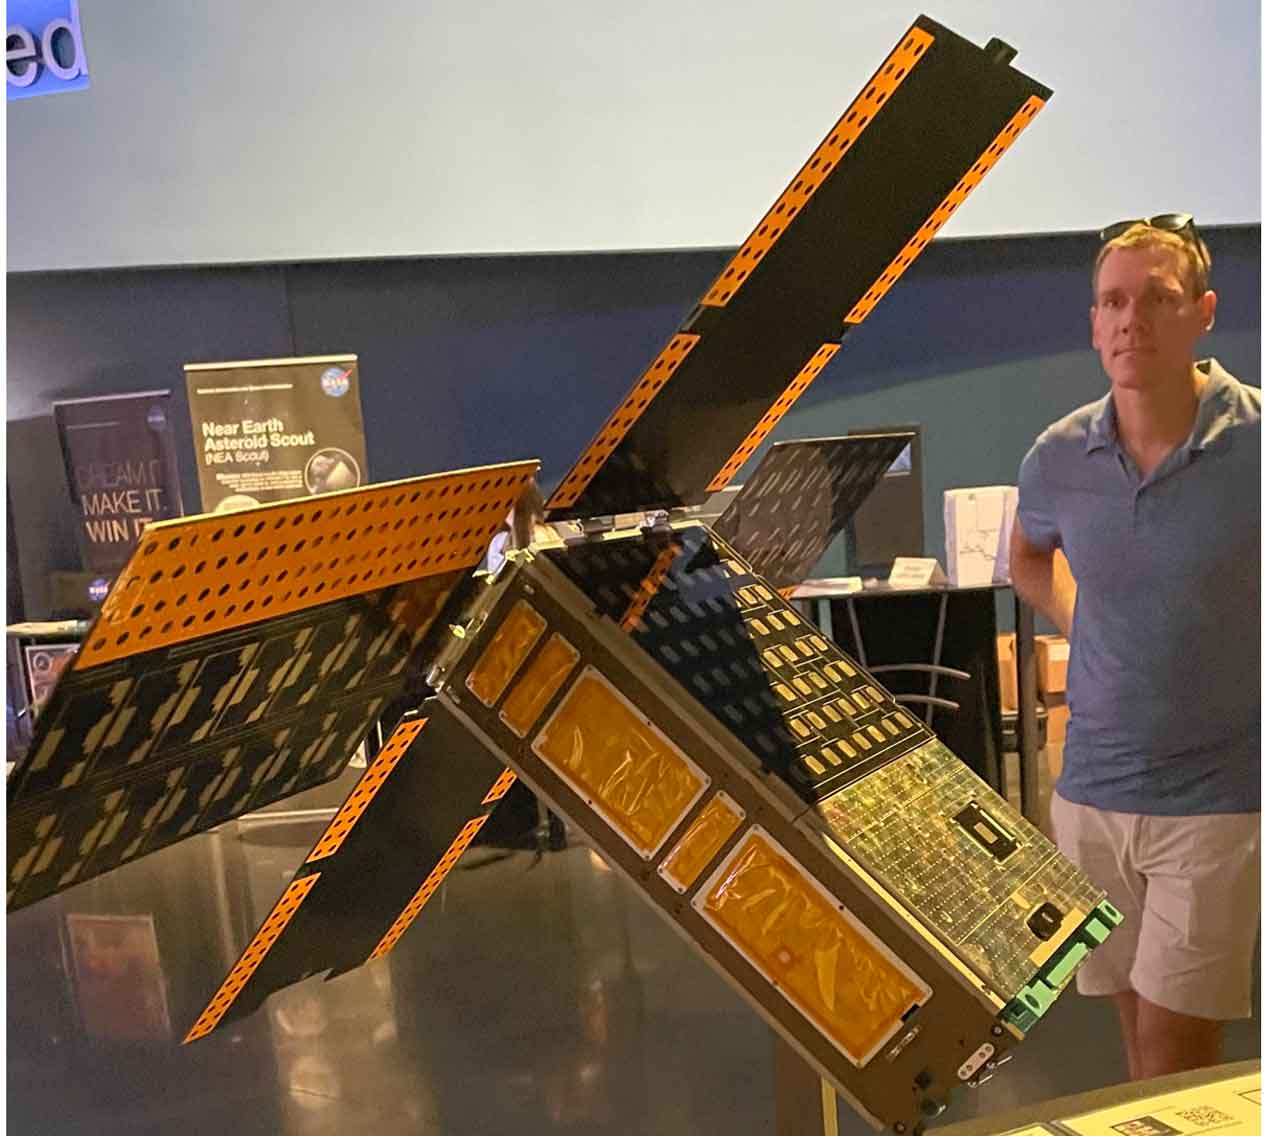 Dr. Chris Thome beside a 6U CubeSat spaceship at NASA Kennedy Space Center. 